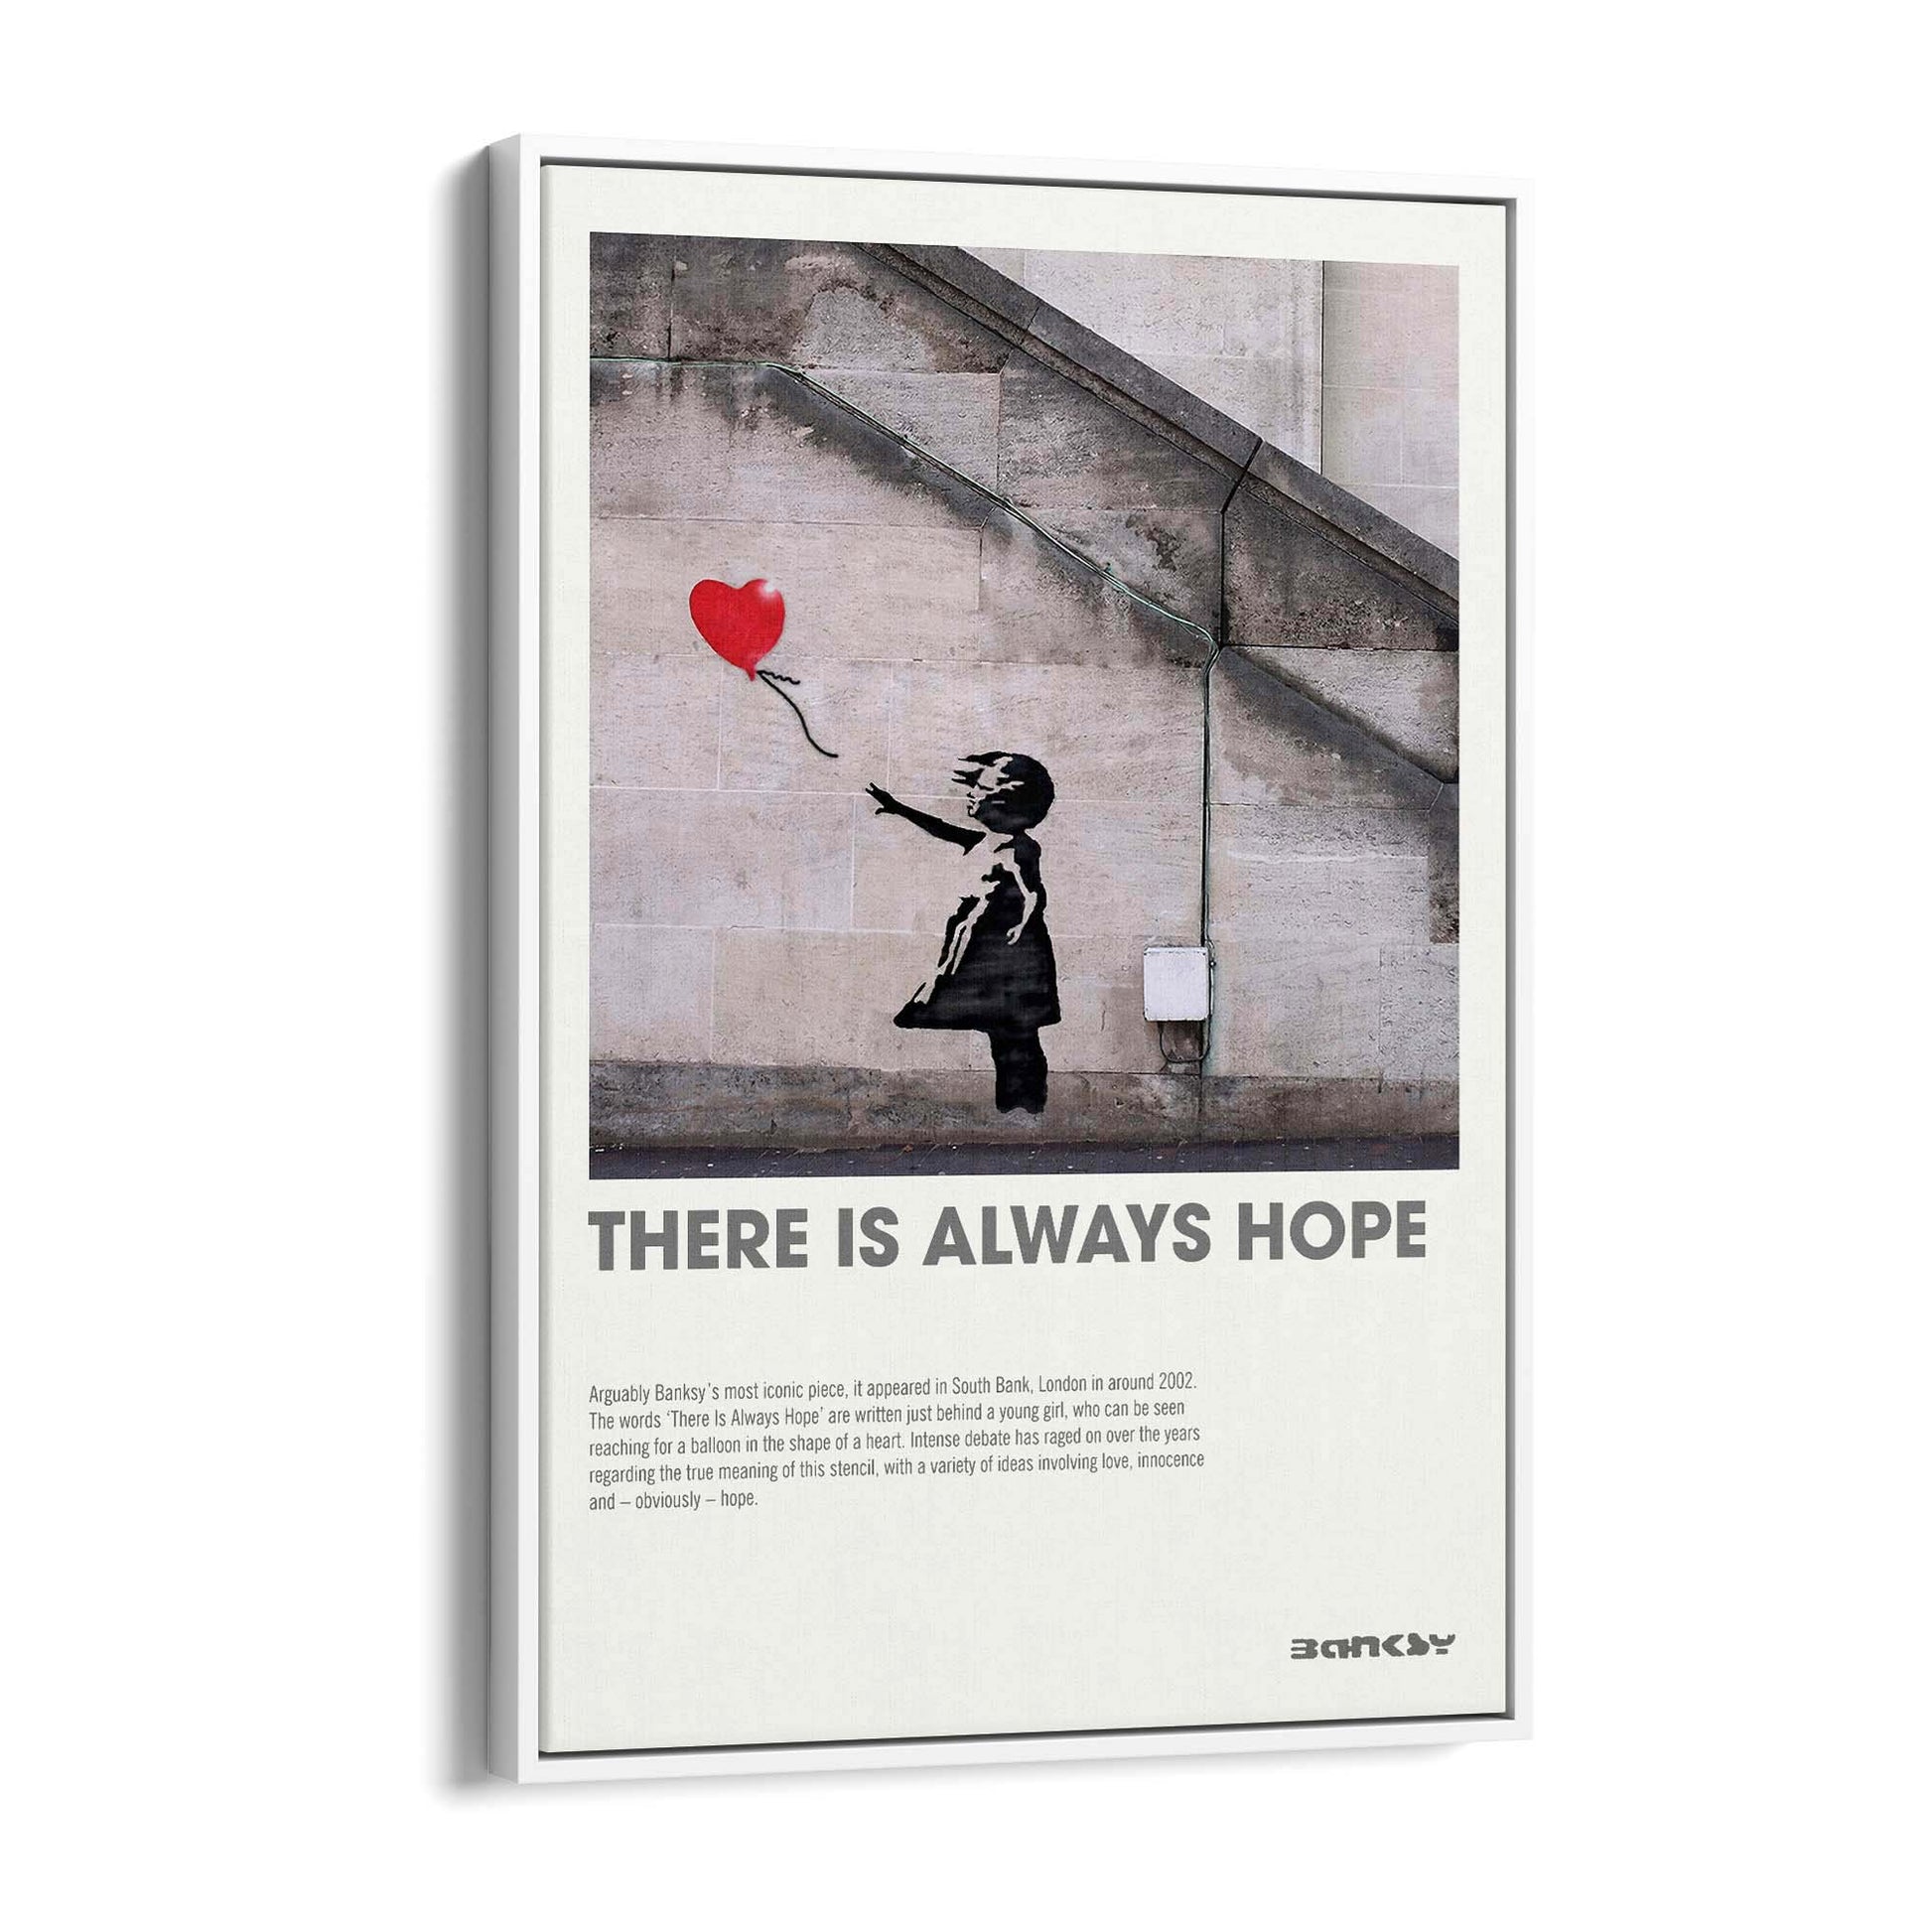 Banksy "Hope" Graffiti Gallery Style Unique Wall Art - The Affordable Art Company